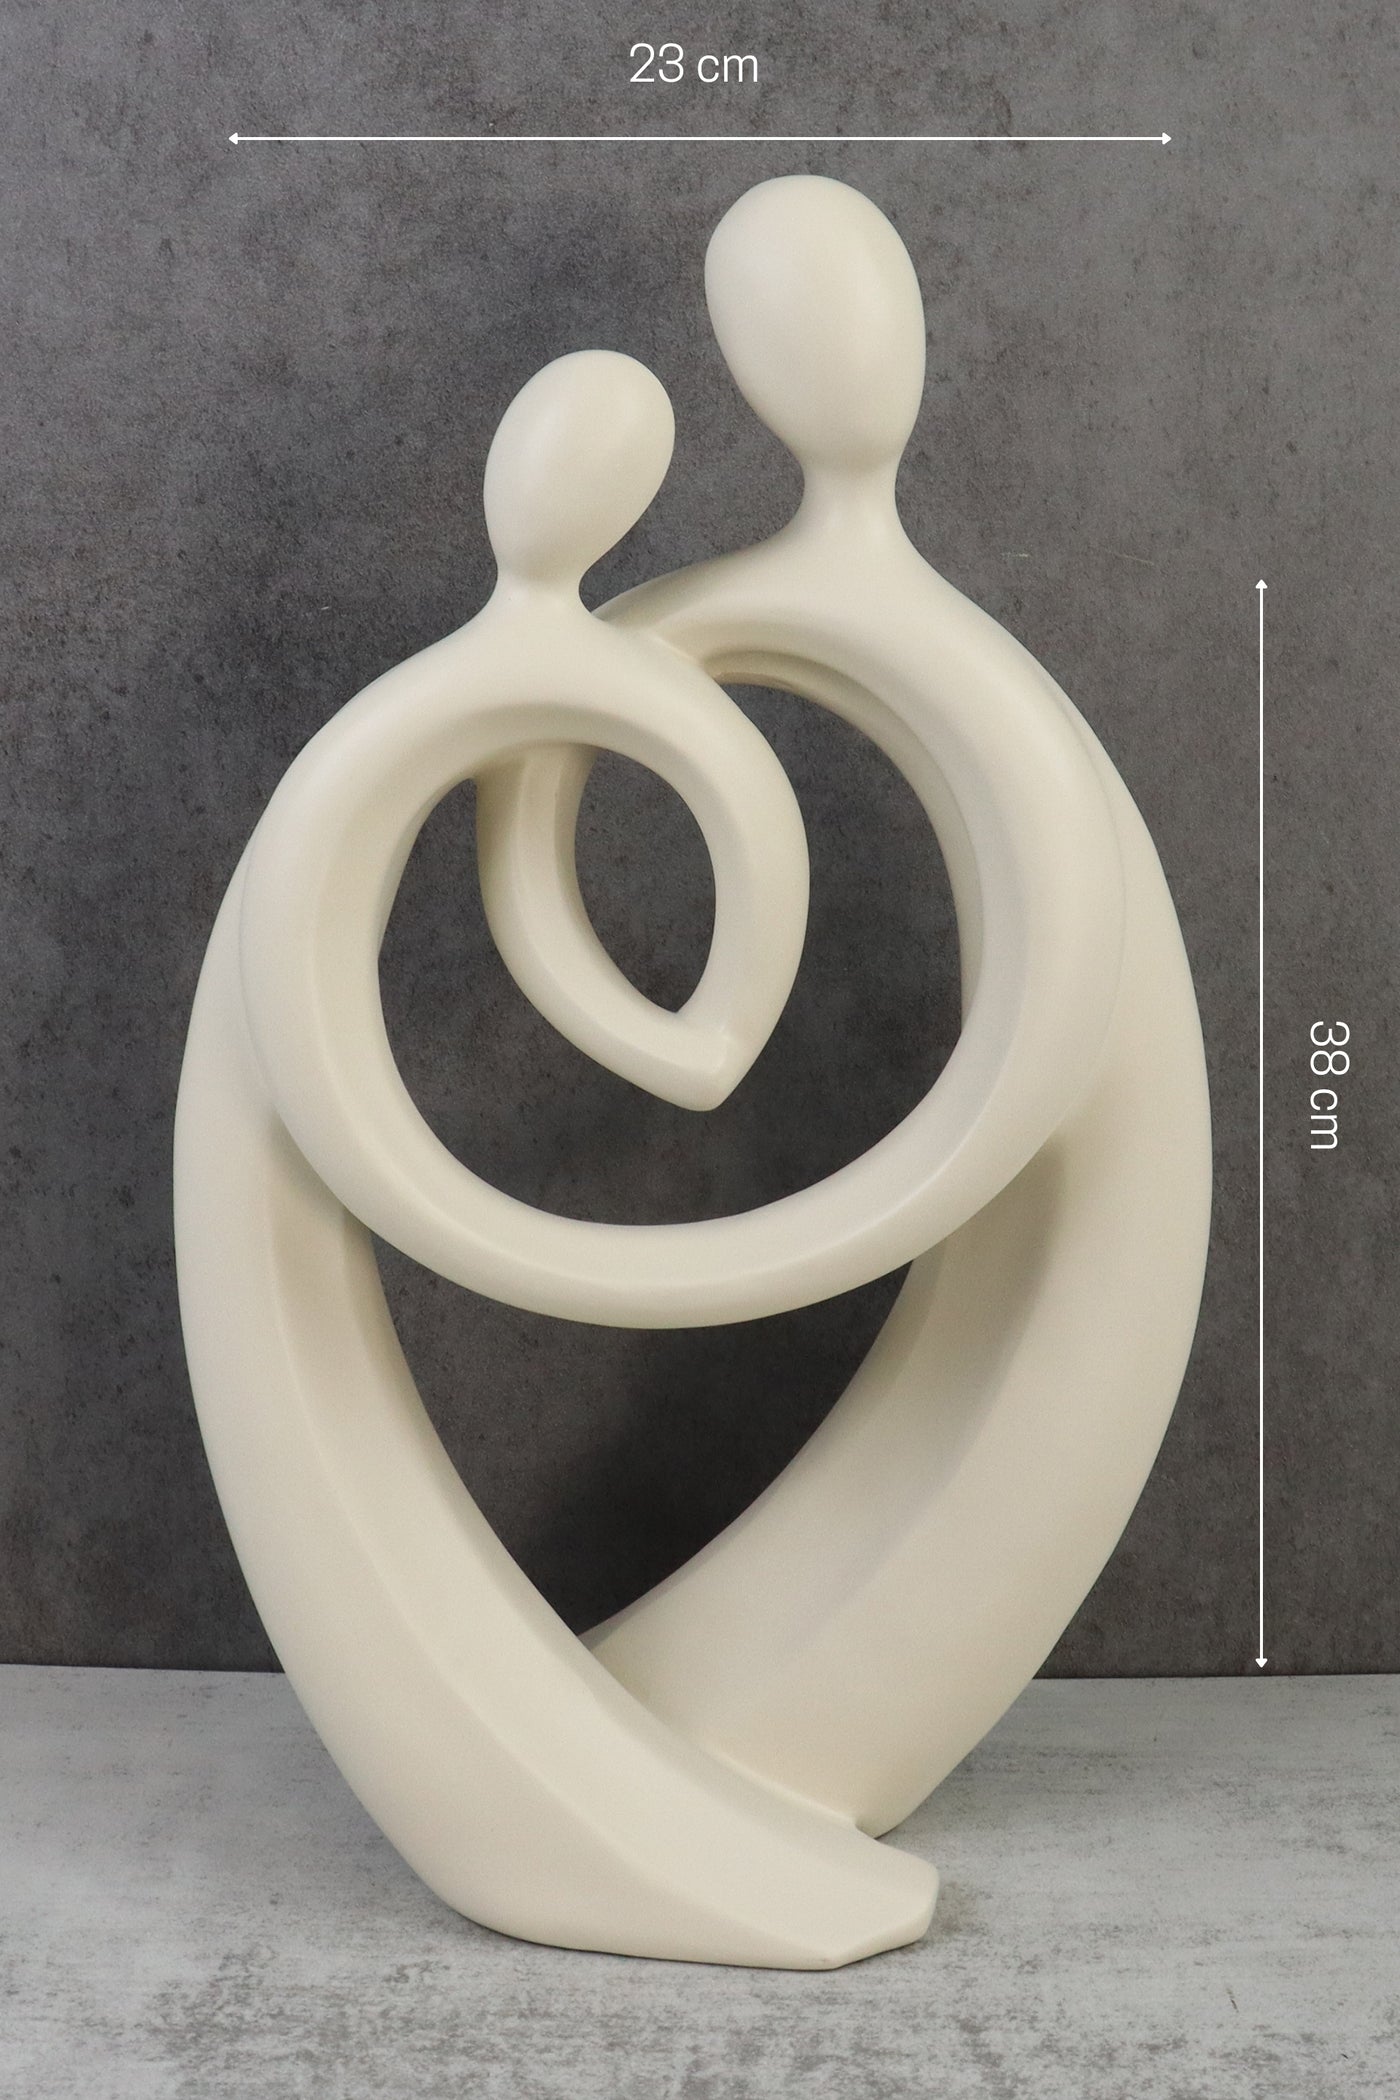 Couple Statue Abstract statue for your home or office decor